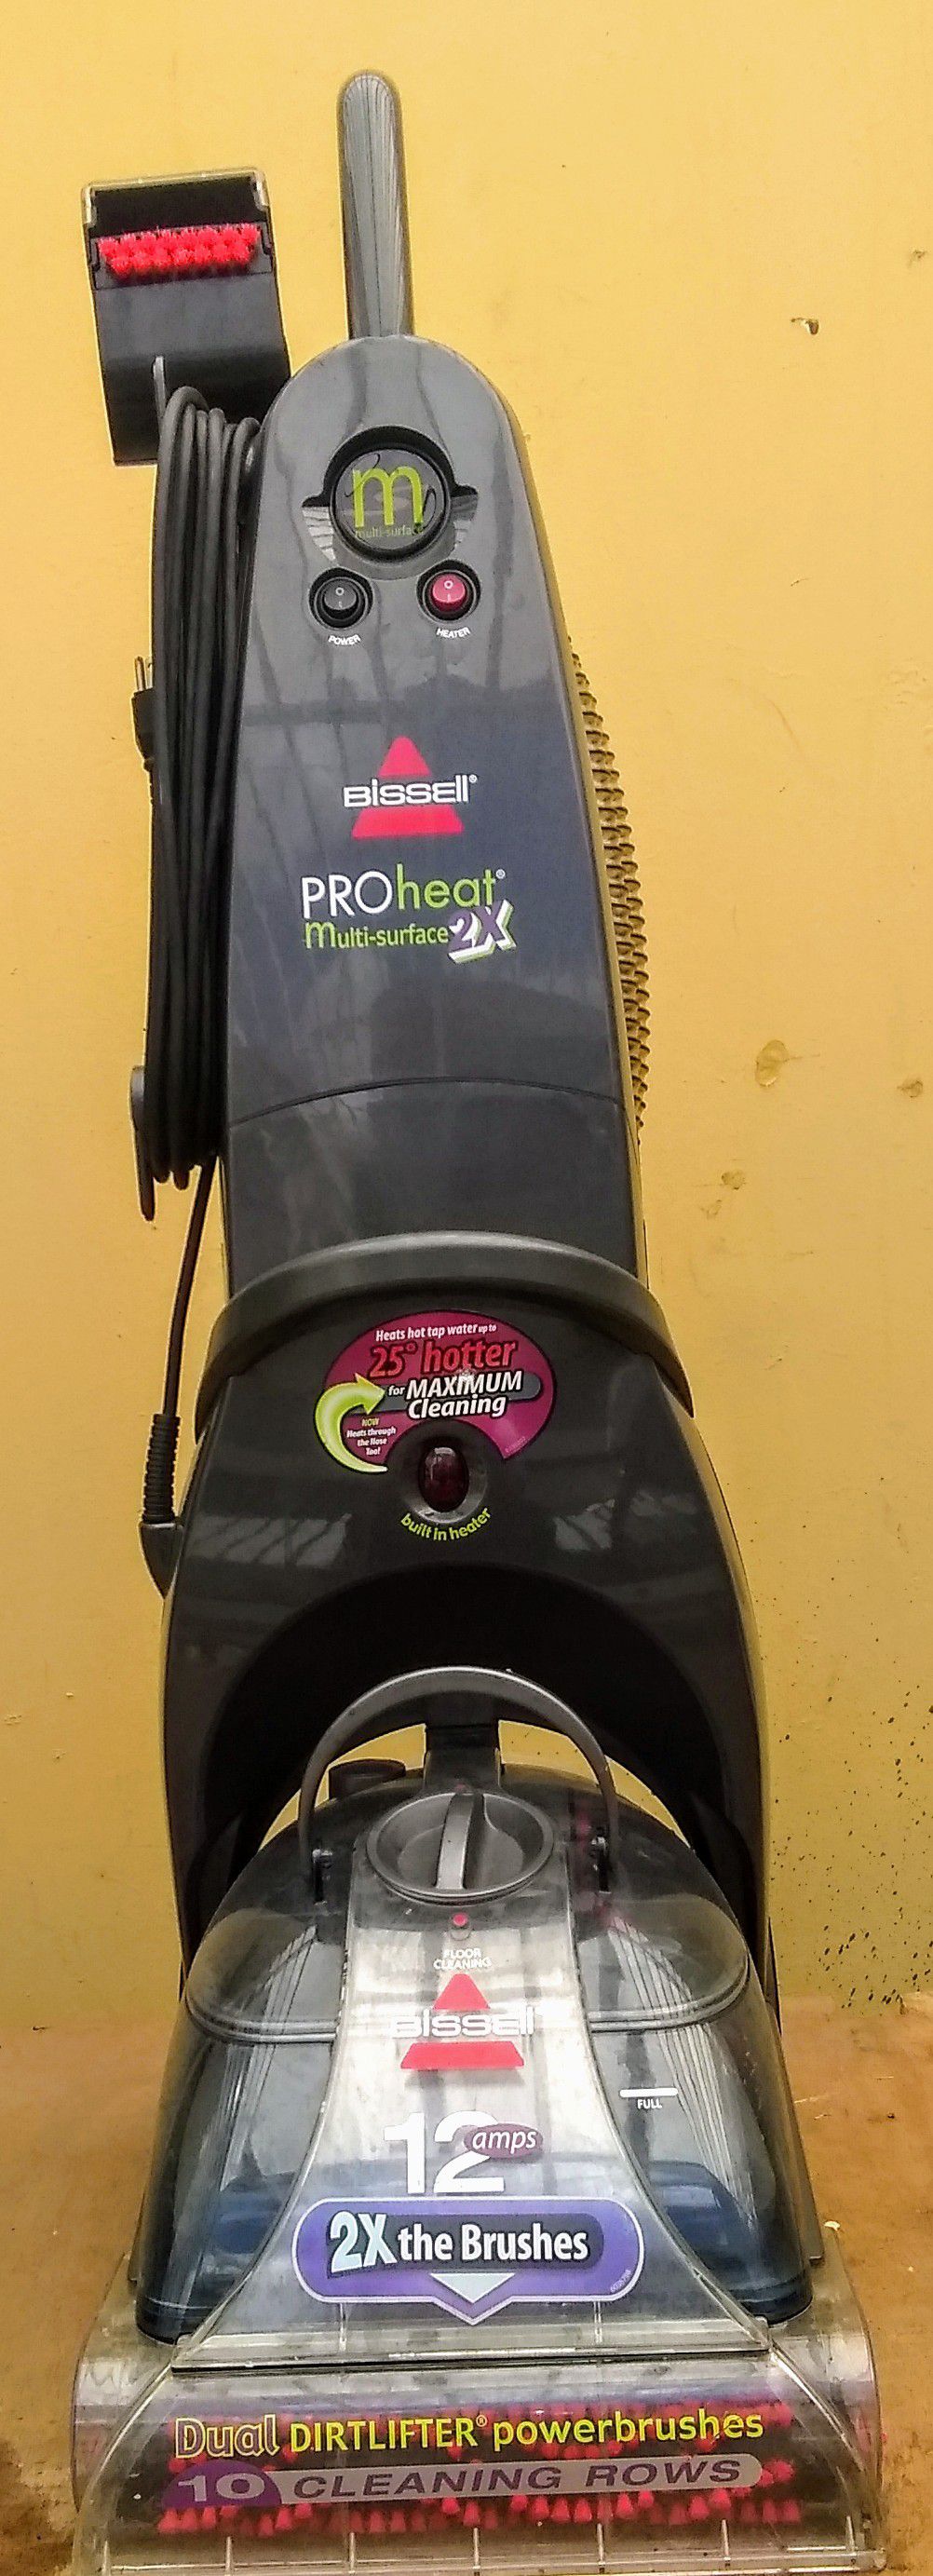 Bissell PROheat Multi-surface 2X Carpet Cleaner